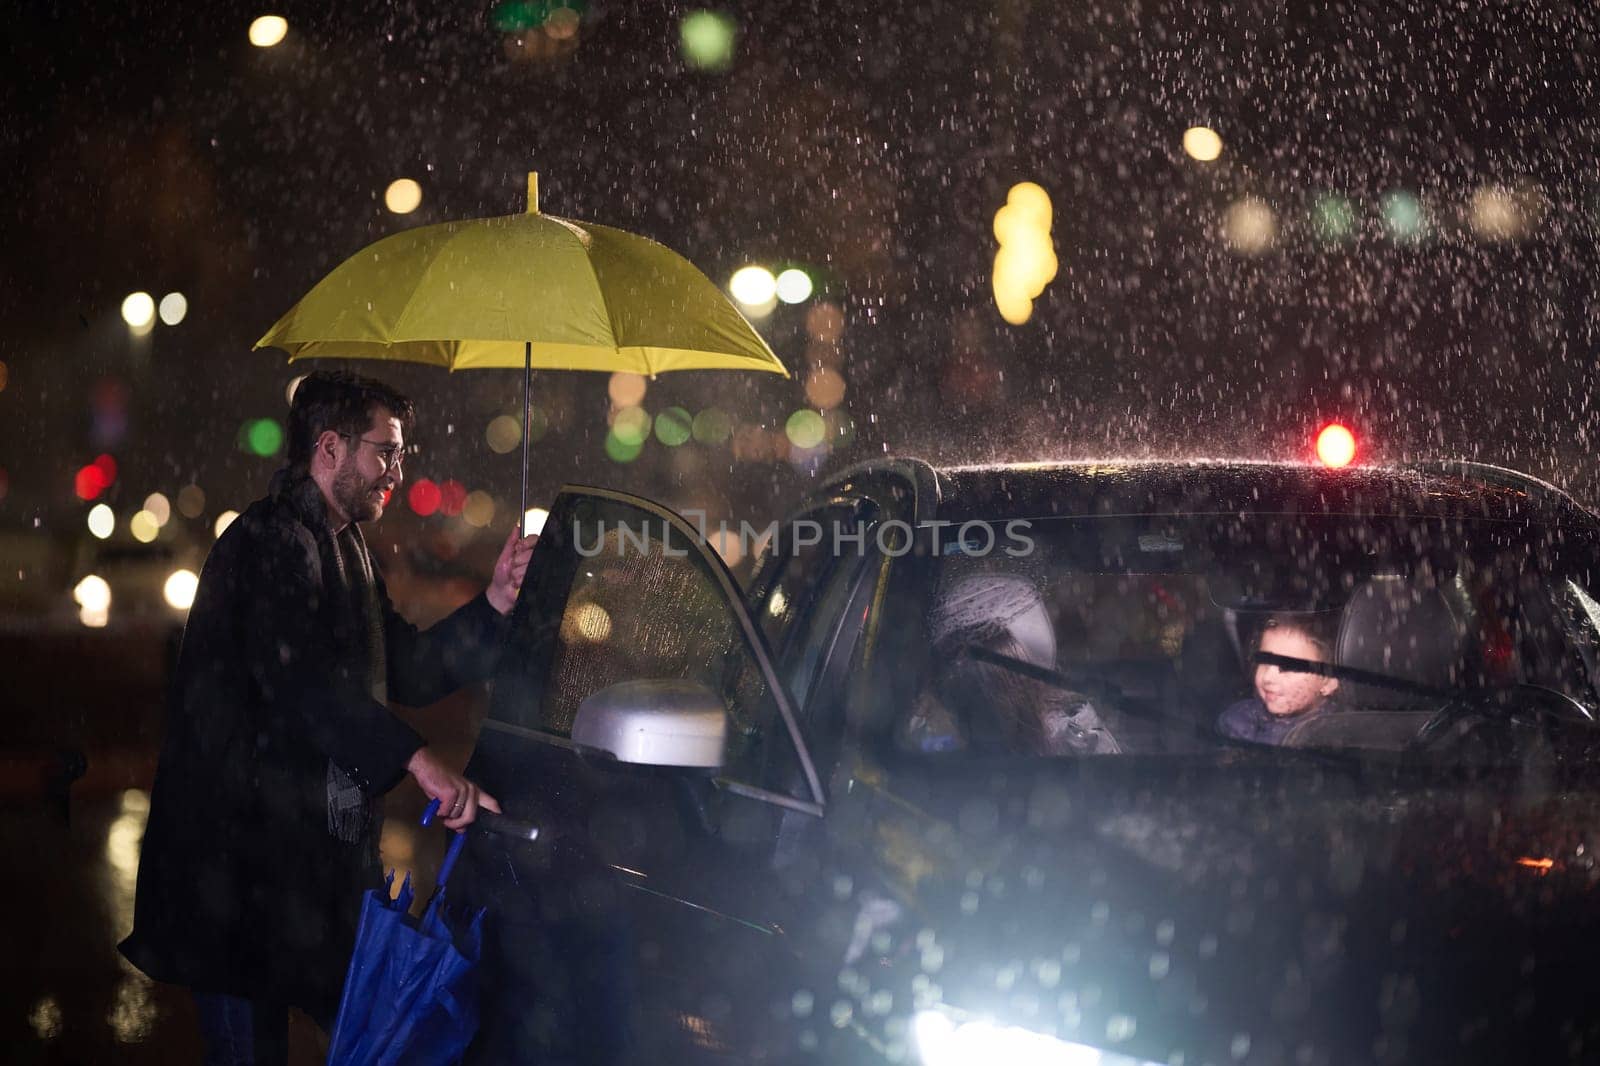 A family man lovingly opens the car for his family in rainy weather, sheltering them with an umbrella.